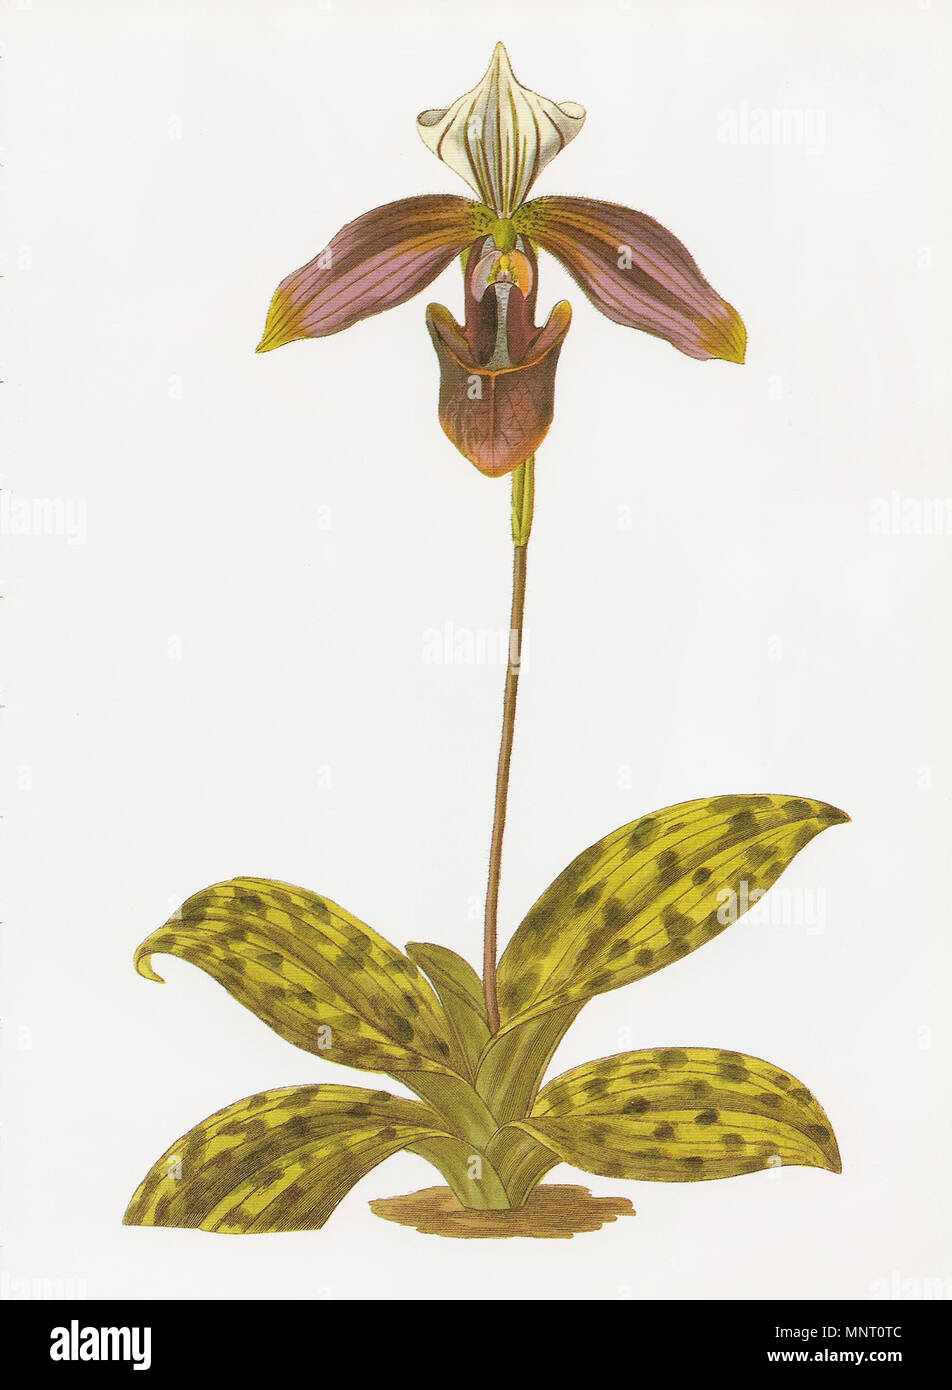 . English: Cypripedium (now: Paphiopedilum purpuratum), a hand-coloured engraving after a drawing by Miss S. A. Drake (fl. 1820s-1840s), from the 23rd volume of the Botanical Register (1837), edited by John Lindley. 1837. Miss S. A. Drake 959 Paphiopedilum purpuratum RHS Stock Photo